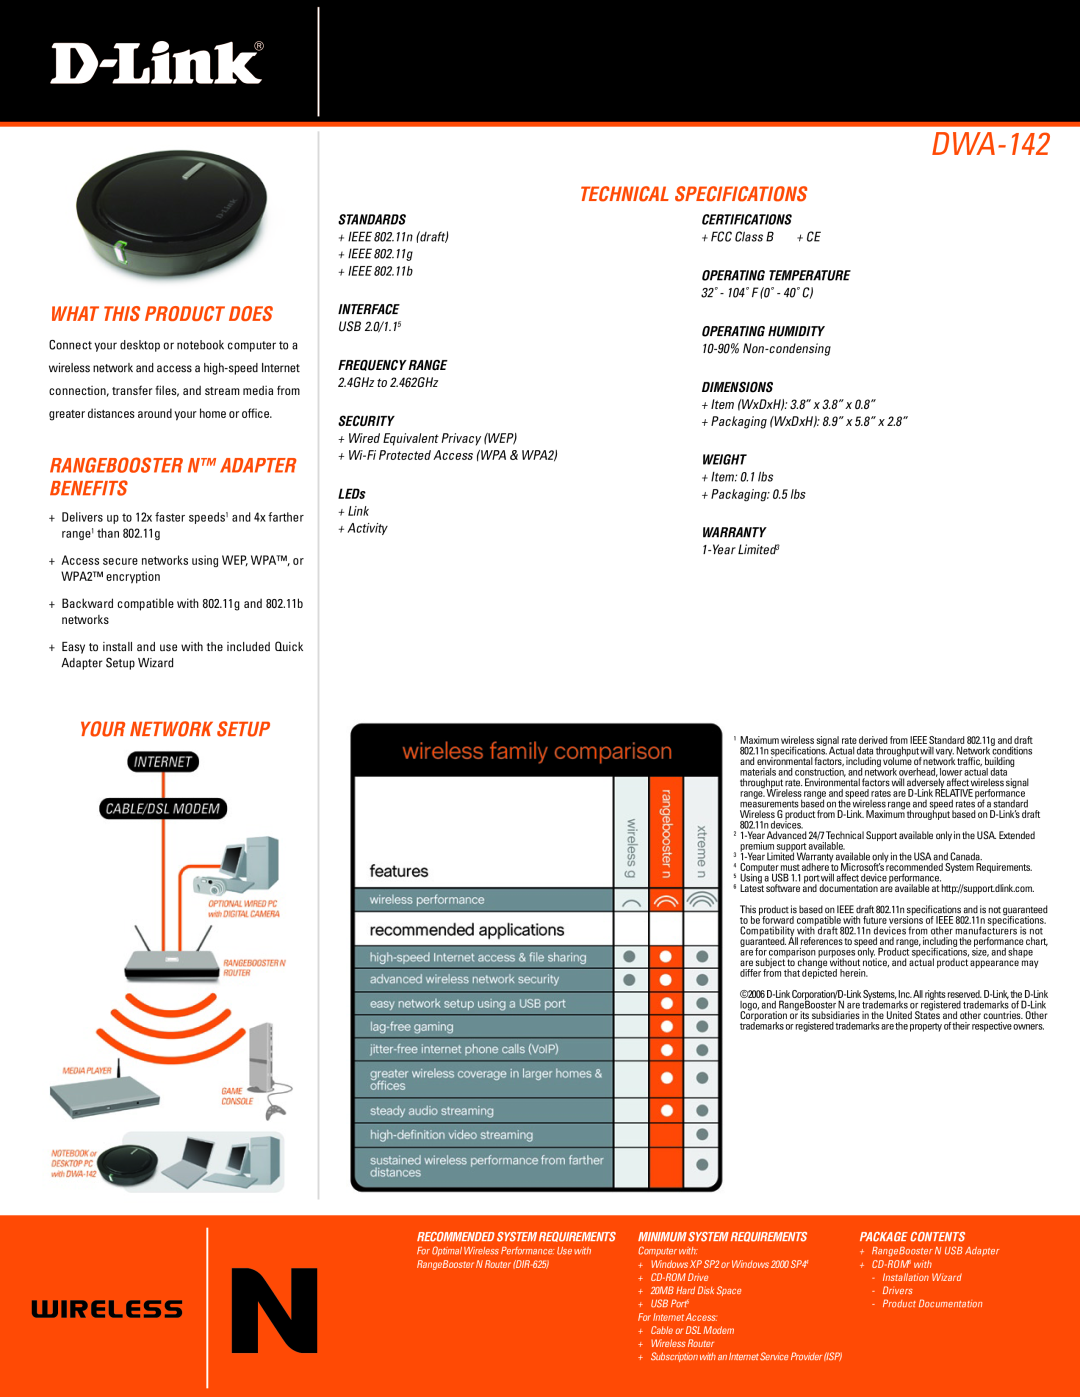 D-Link DWA-142 manual What This Product Does, Rangebooster n adapter benefits, Your Network Setup, Technical Specifications 